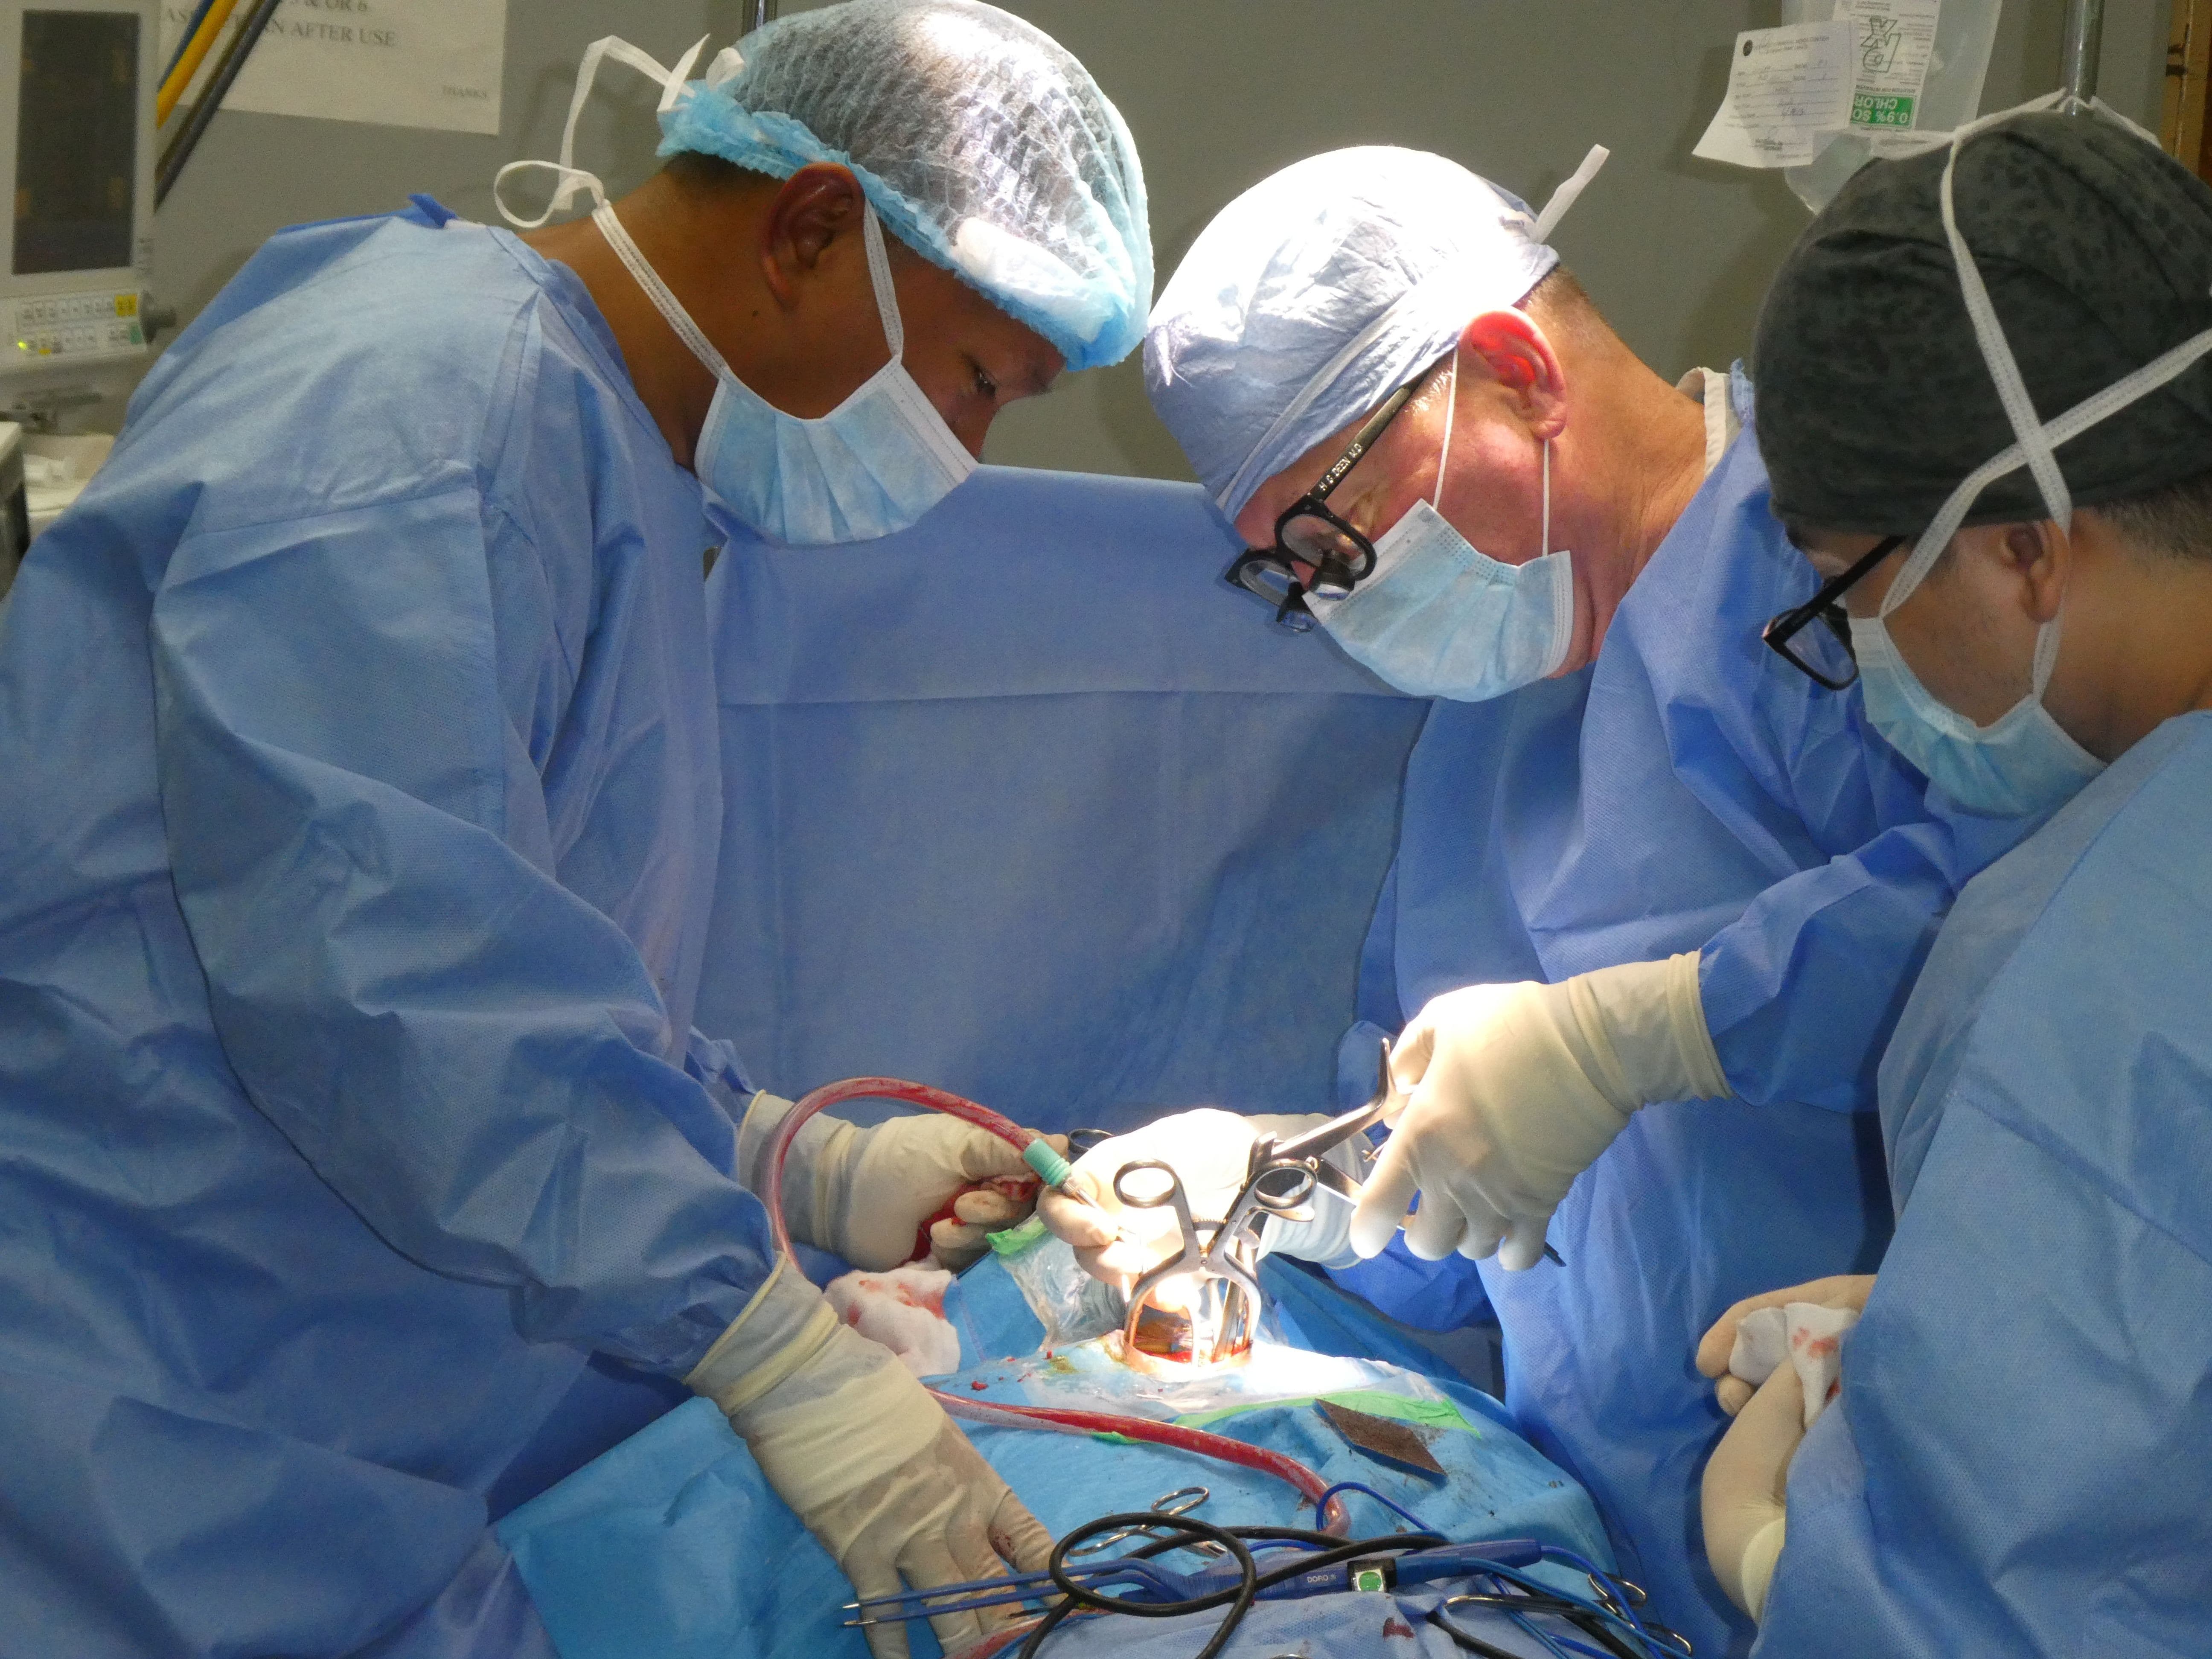 Doctors and a Nurse in Surgery